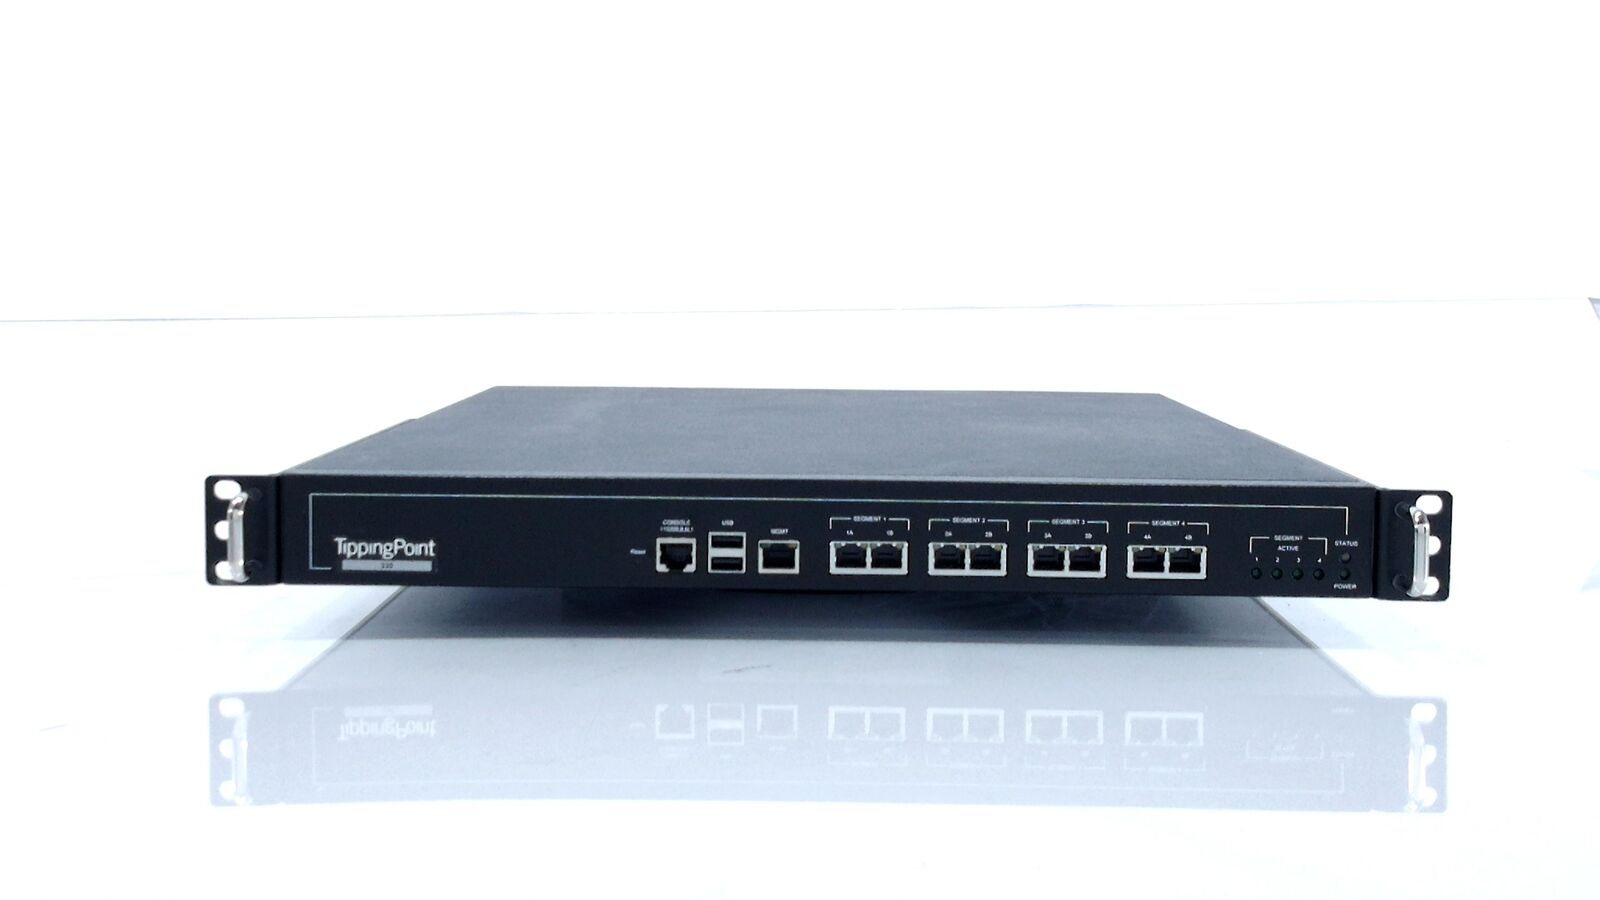 HP TIPPINGPOINT S330 300Mbps IPS Intrusion Prevention System